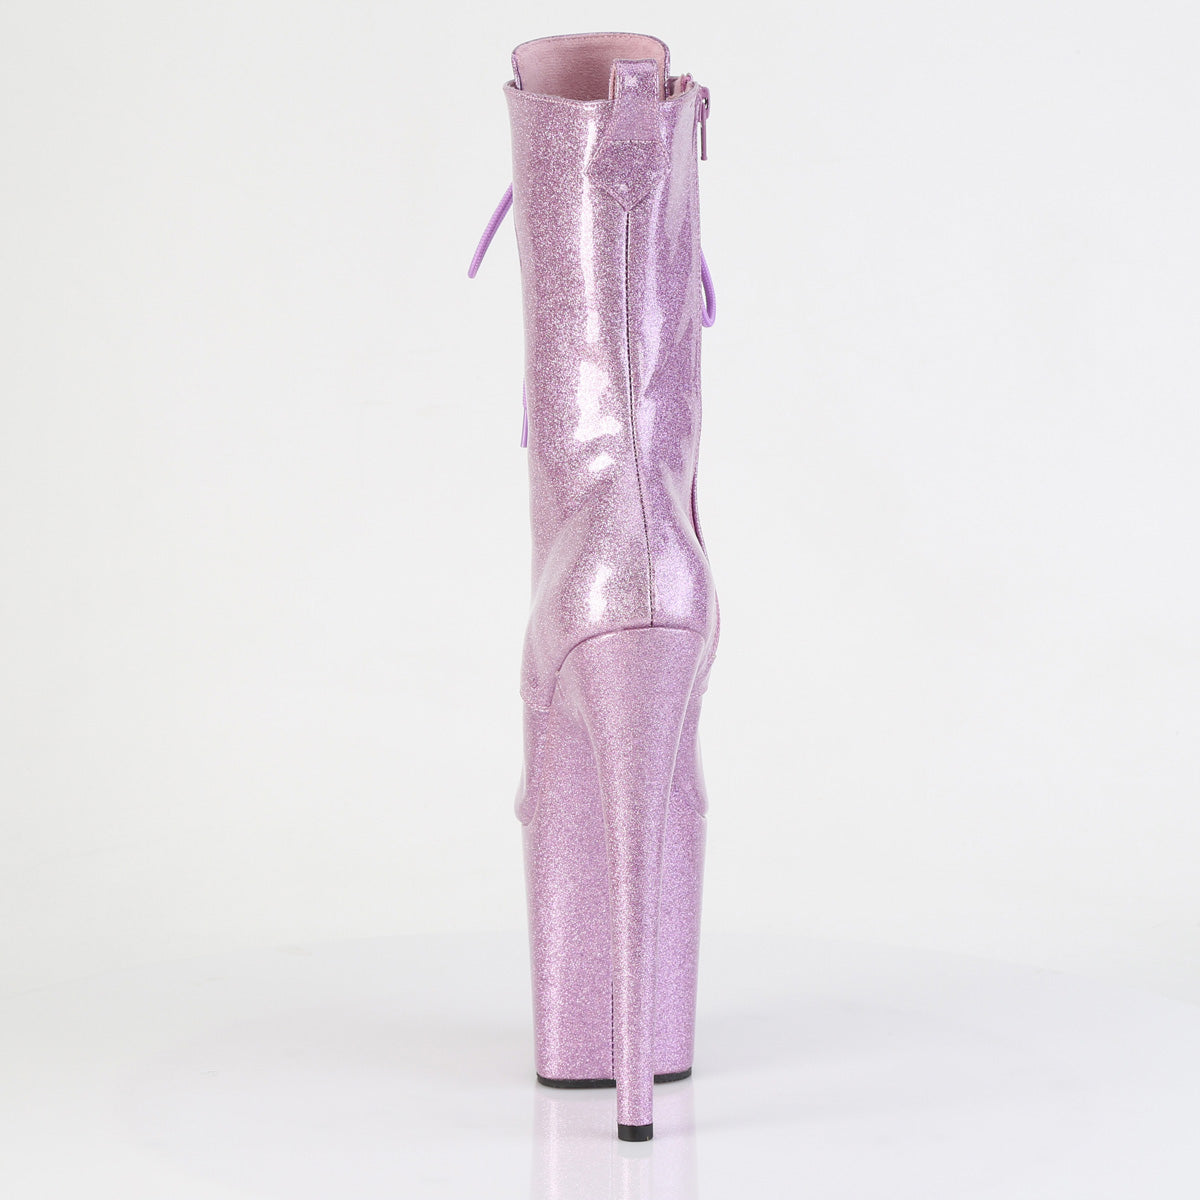 FLAMINGO-1041GP Pleaser Lilac Glitter Pole Dancing Open Toe Ankle Boots